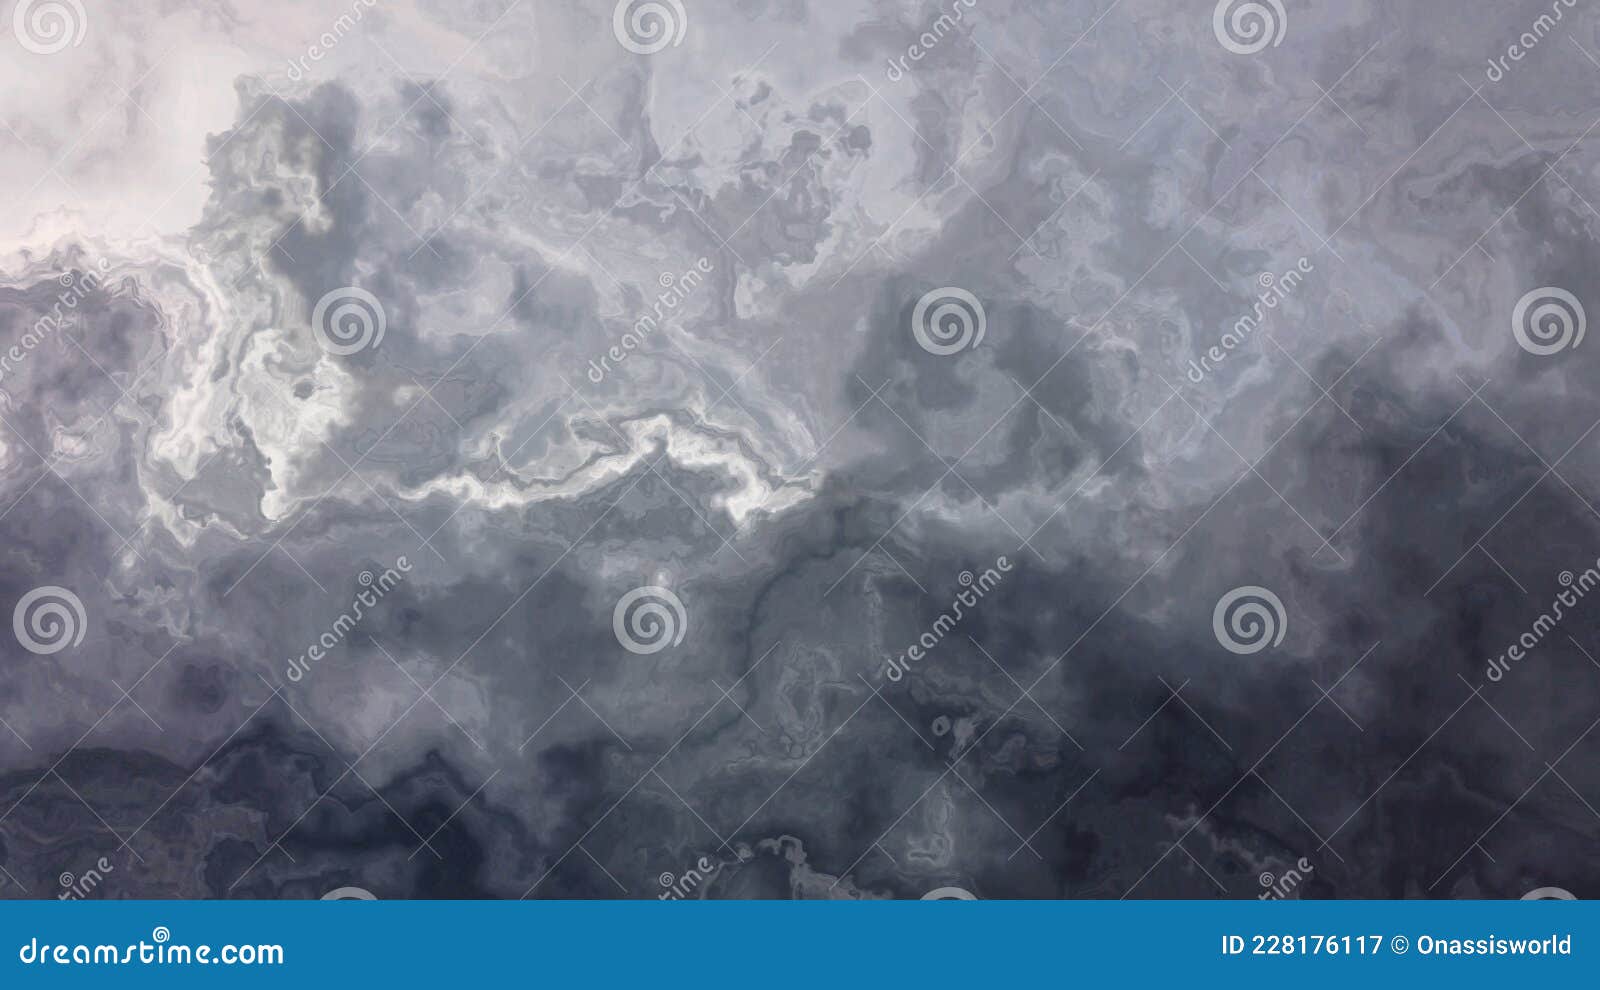 dark overcast clouds abstracts backgrounds